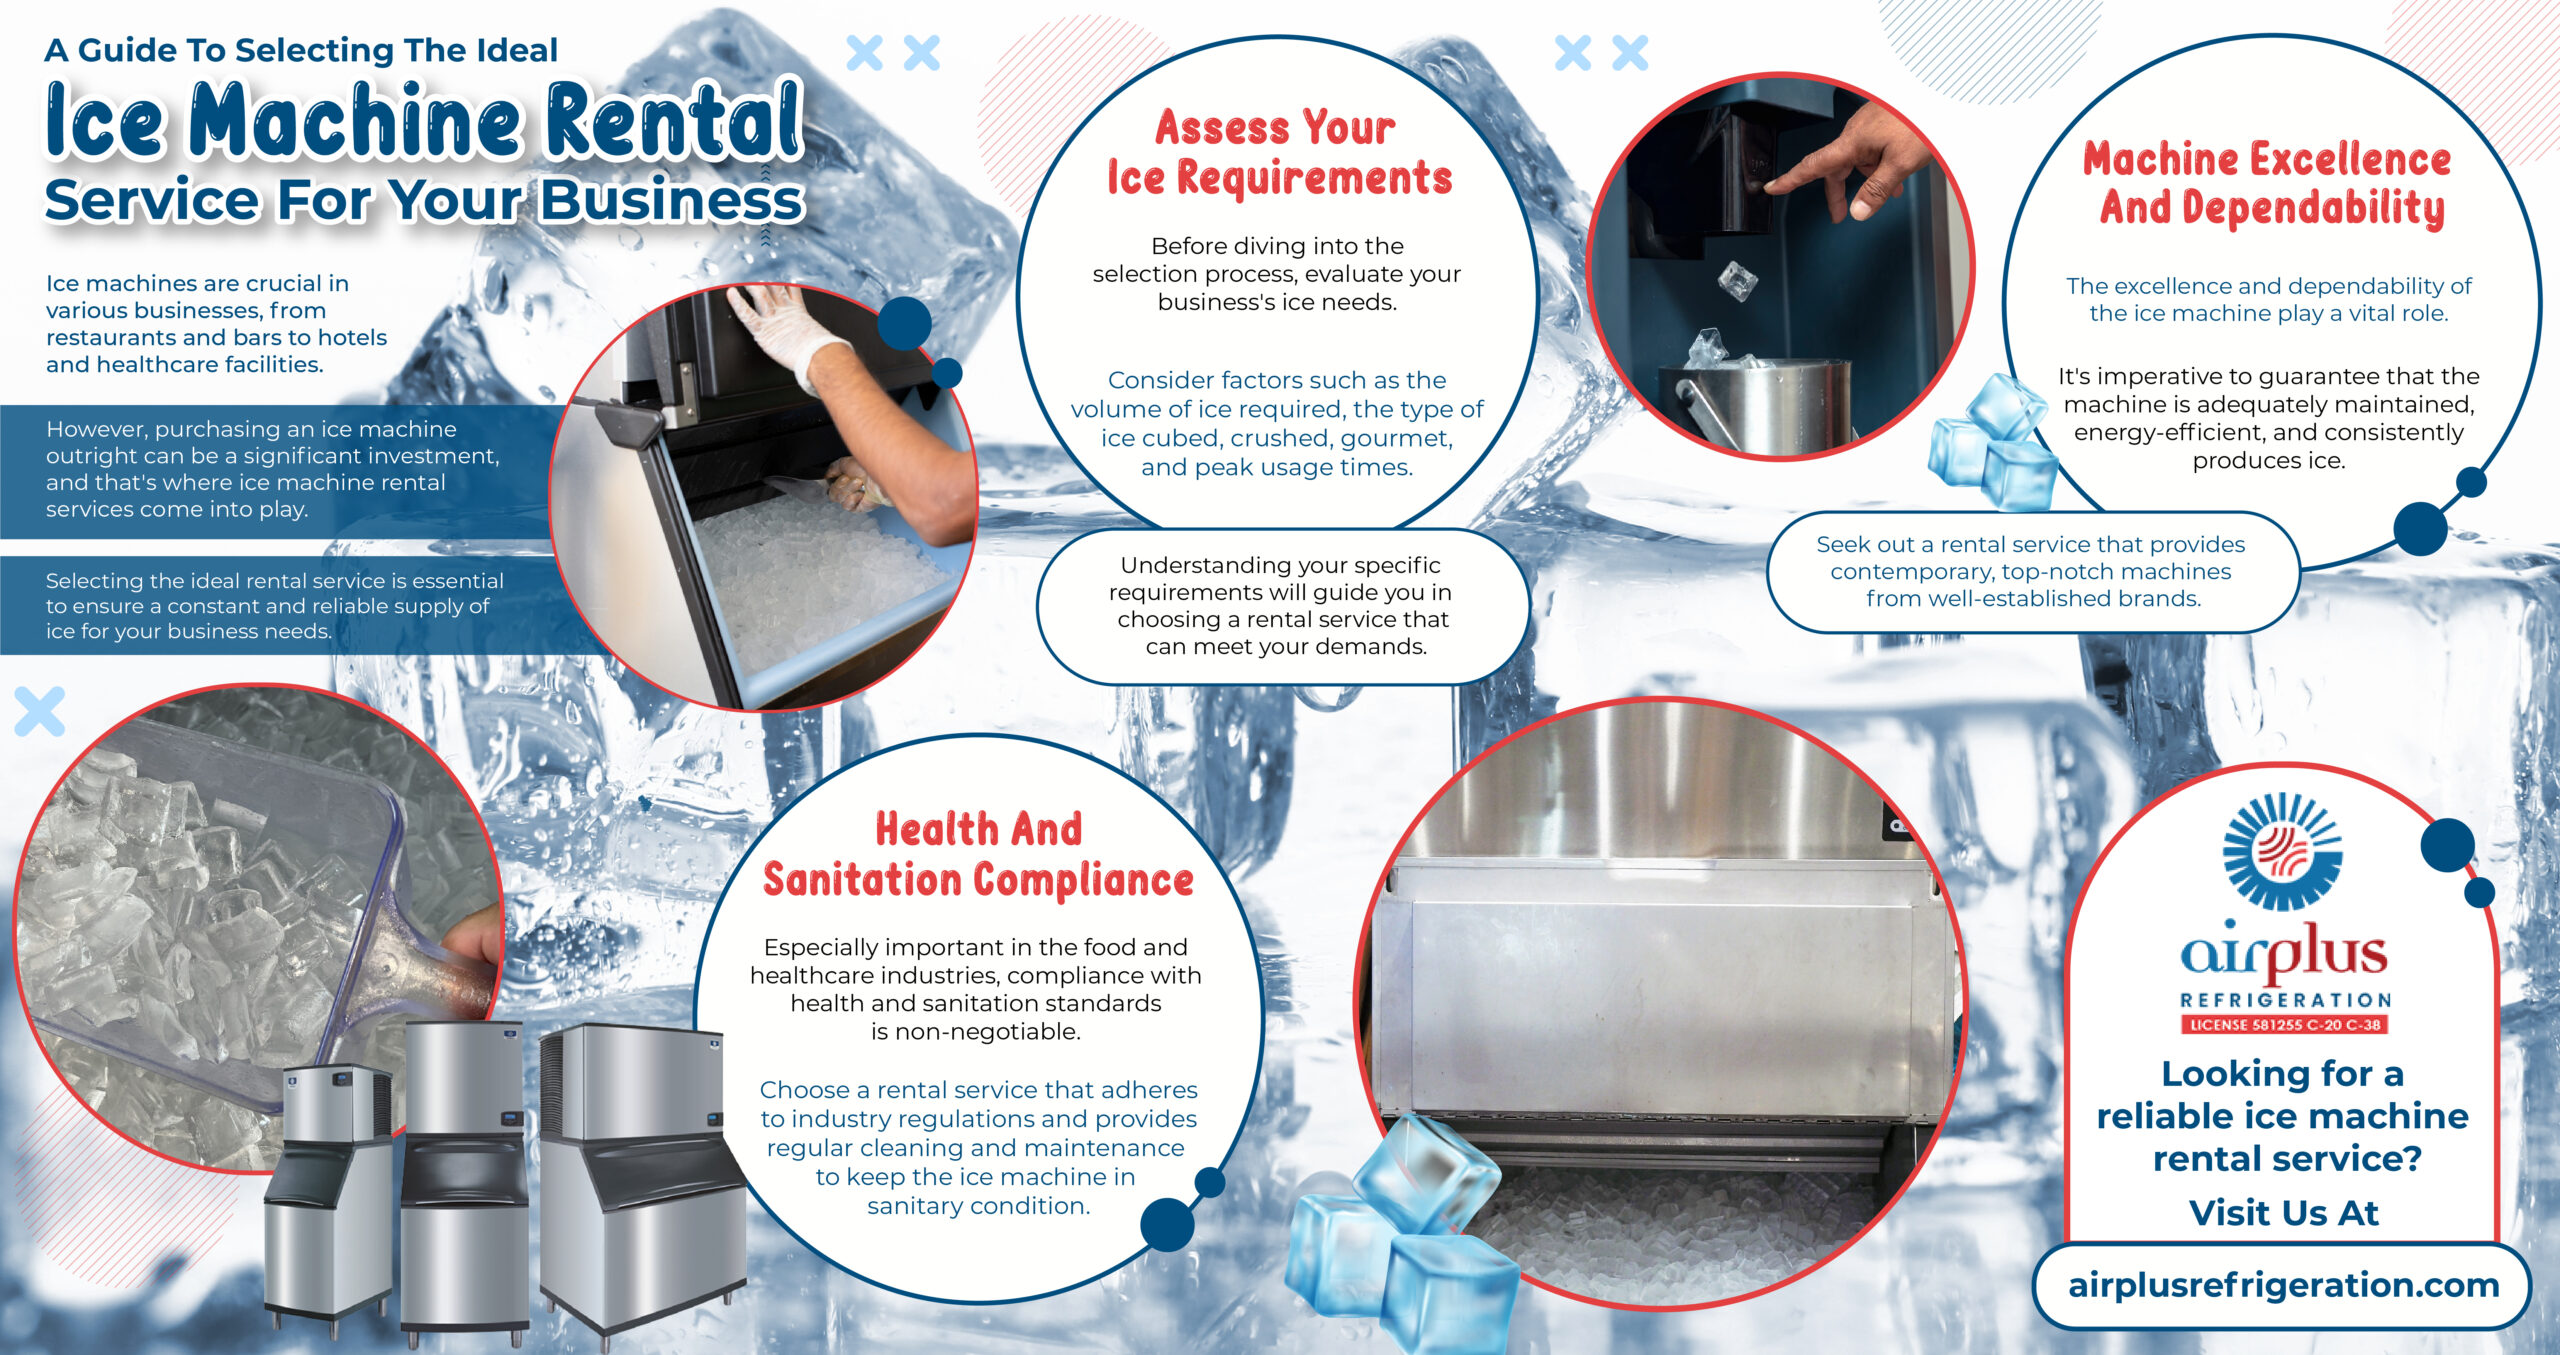 A Guide To Selecting The Ideal Ice Machine Rental Service For Your Business